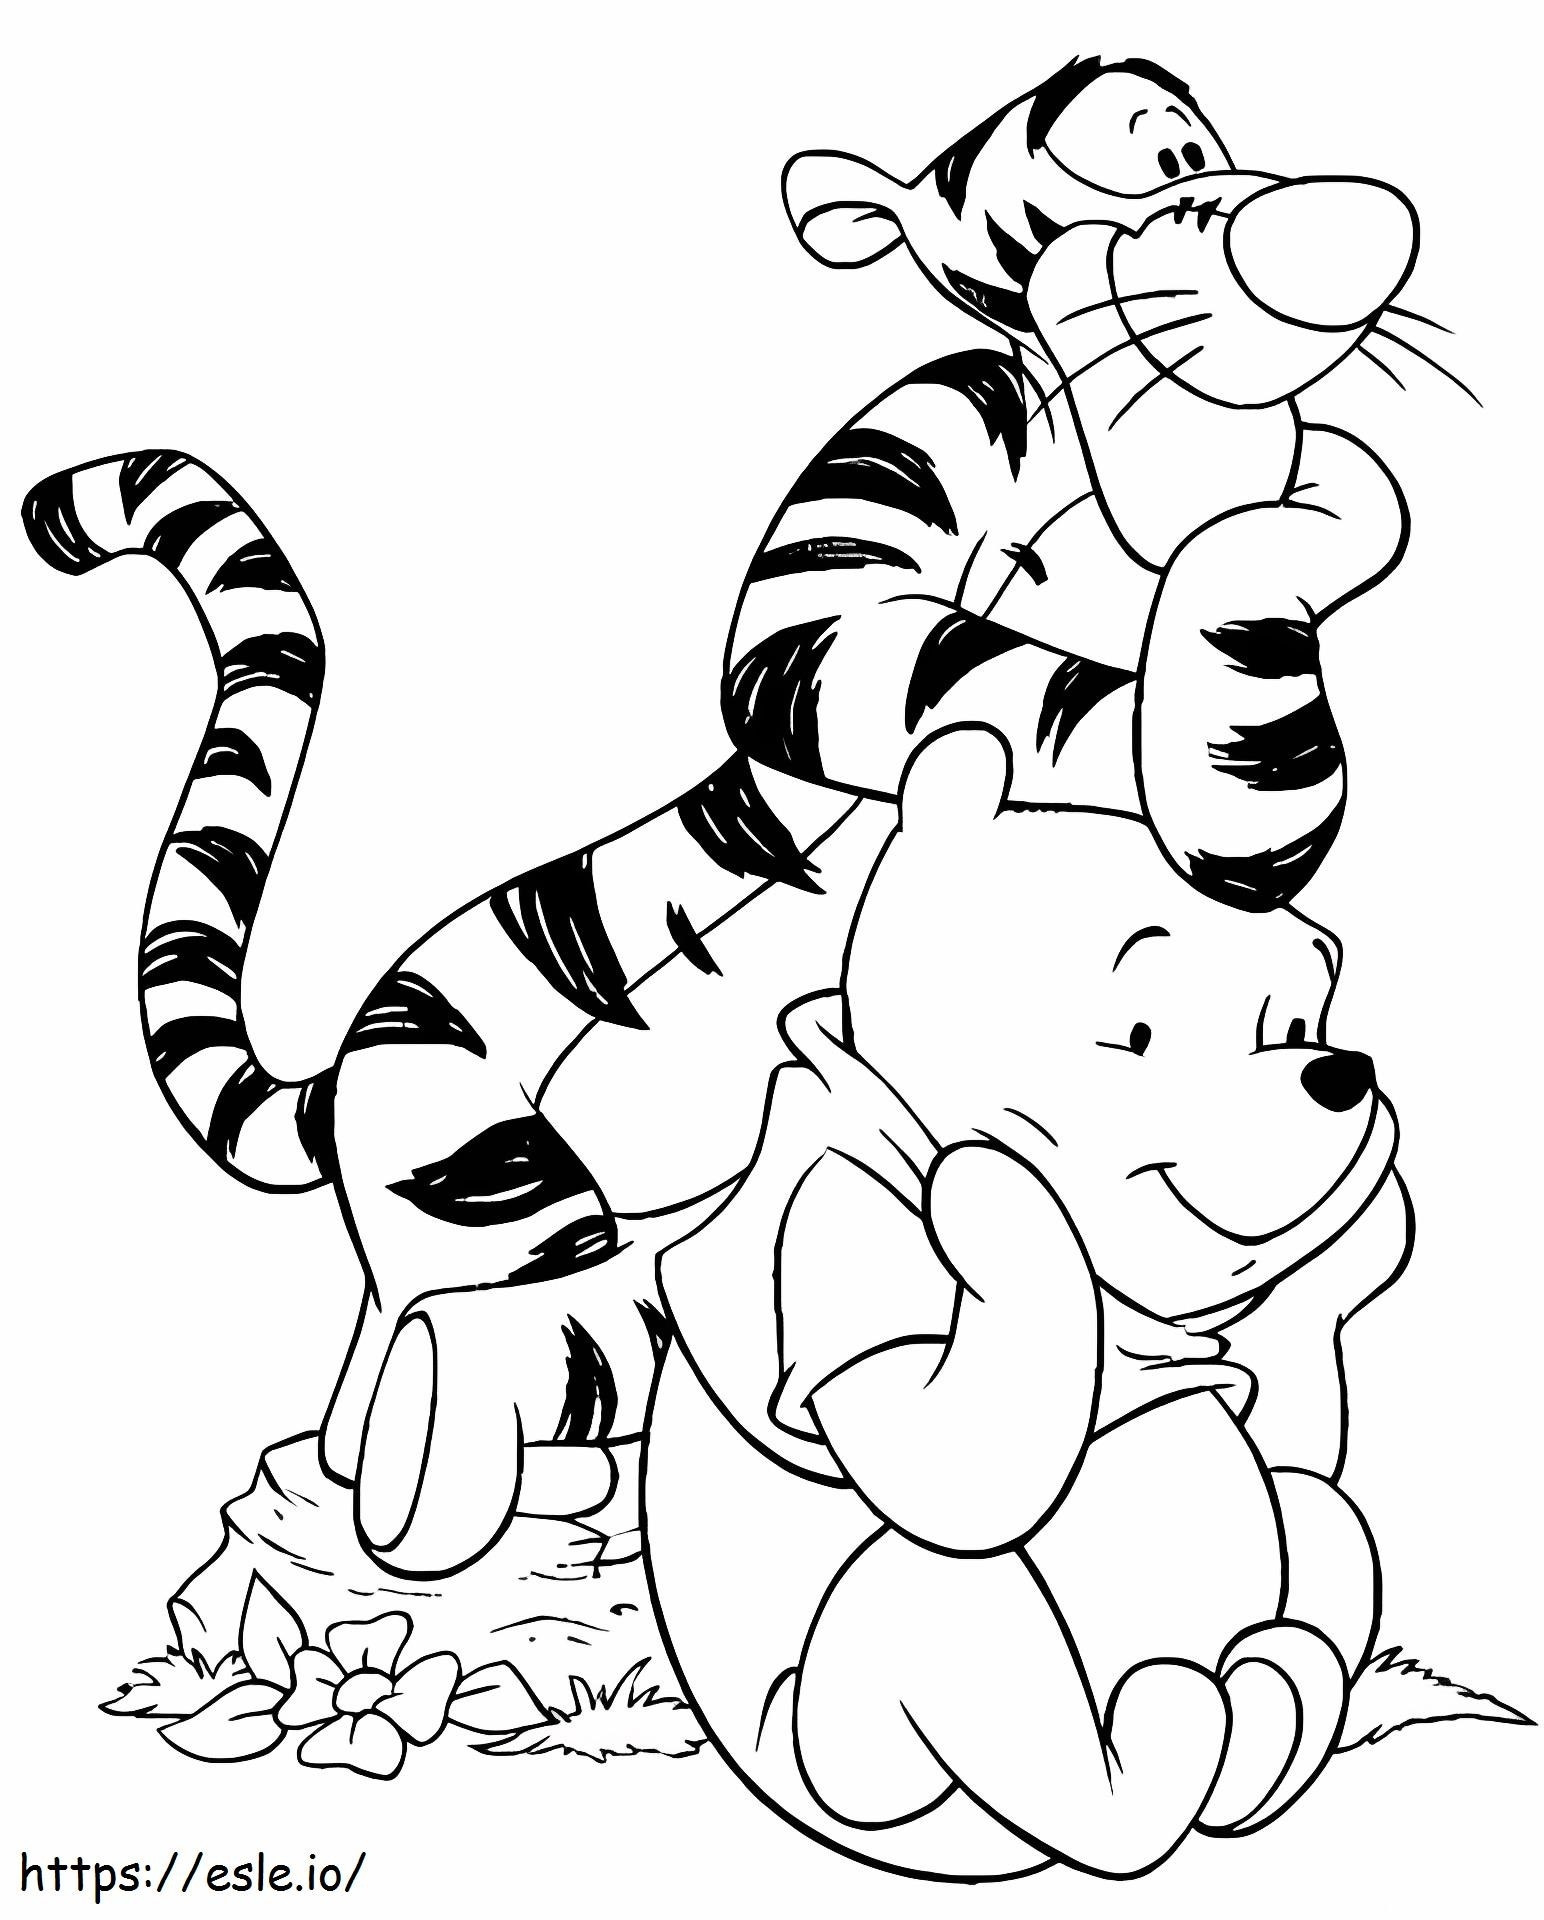 1532942627 Tigger And Pooh Smiling A4 coloring page